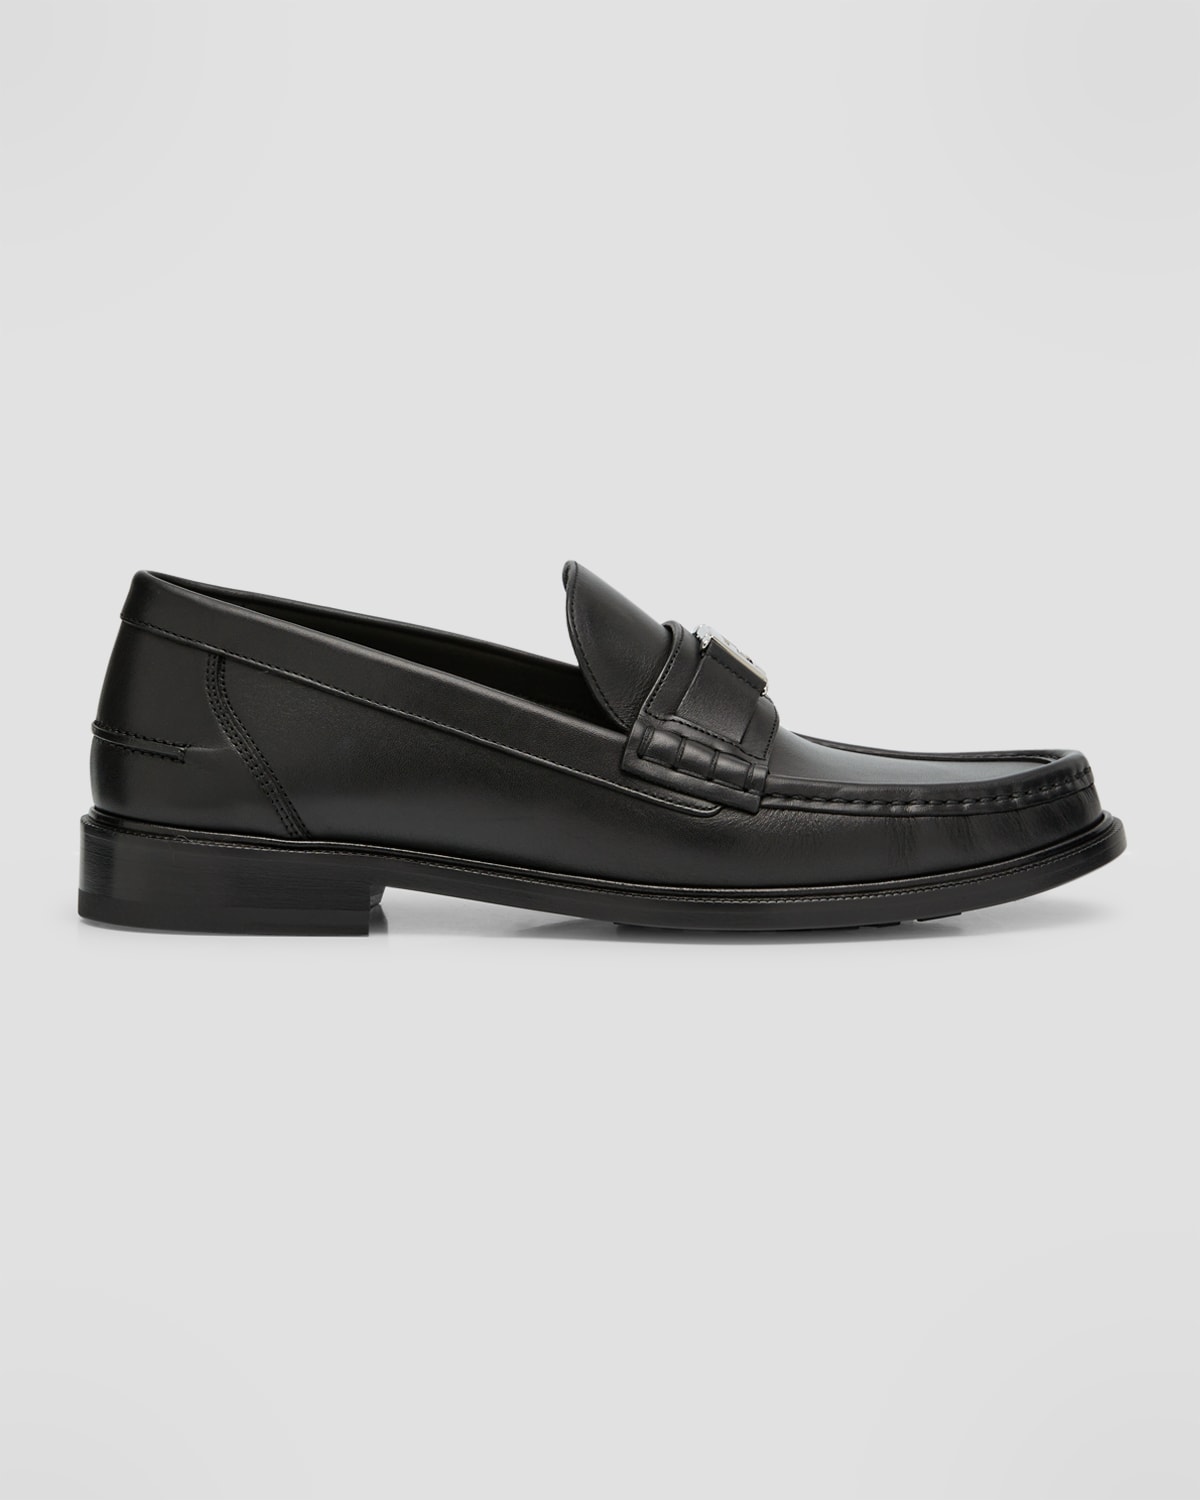 FENDI MEN'S FF LEATHER MOCCASIN LOAFERS